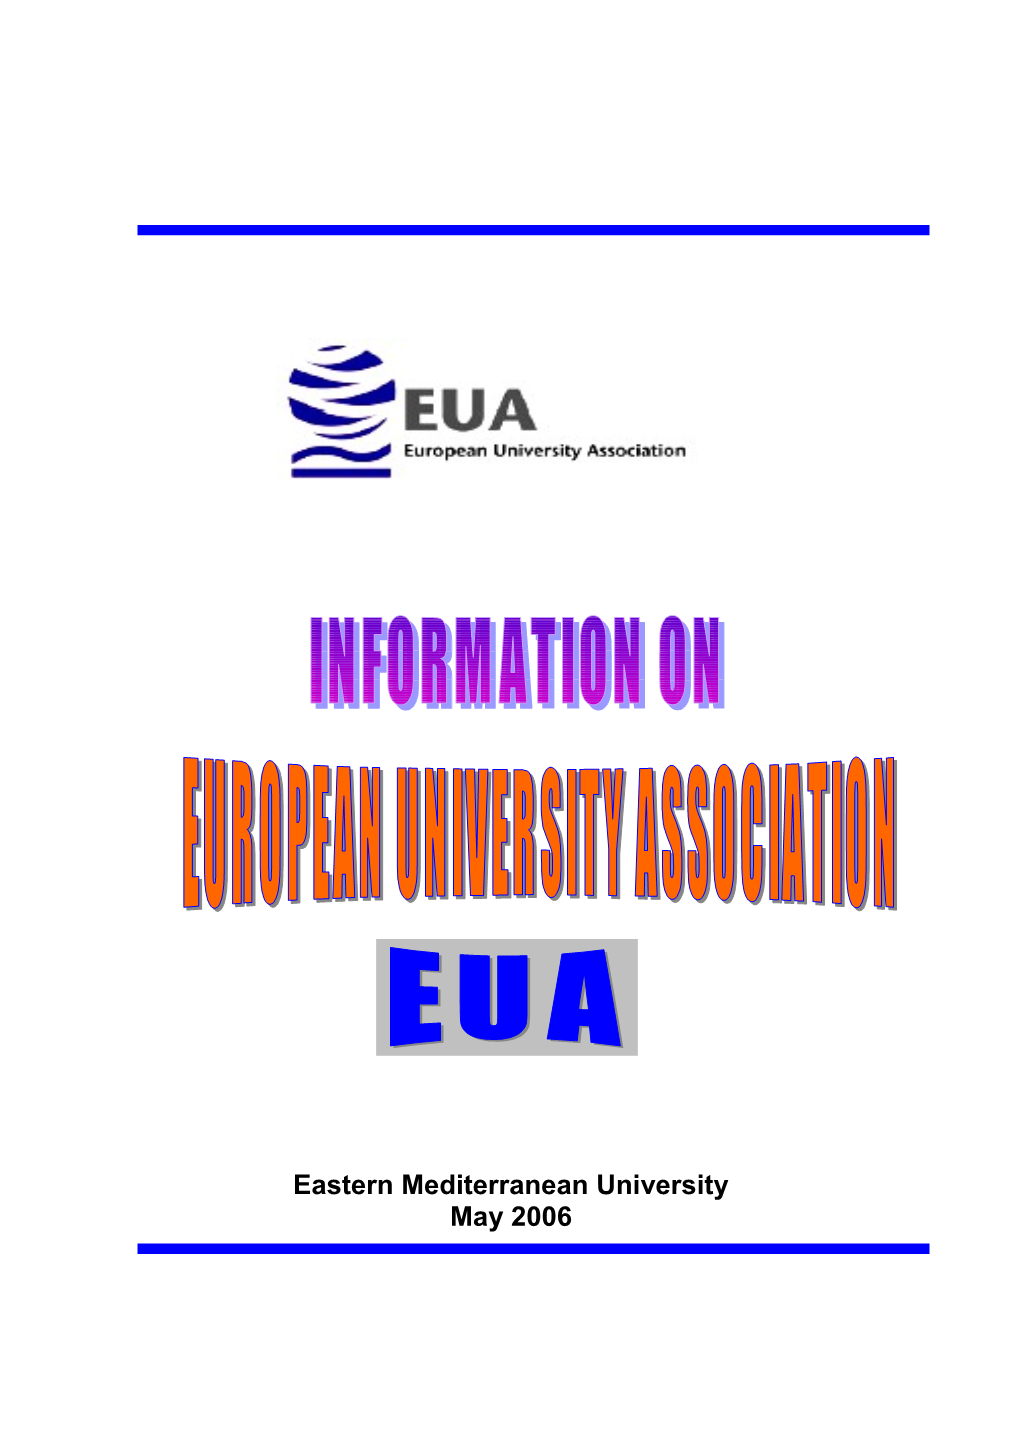 About EUA: Mission and Strategy